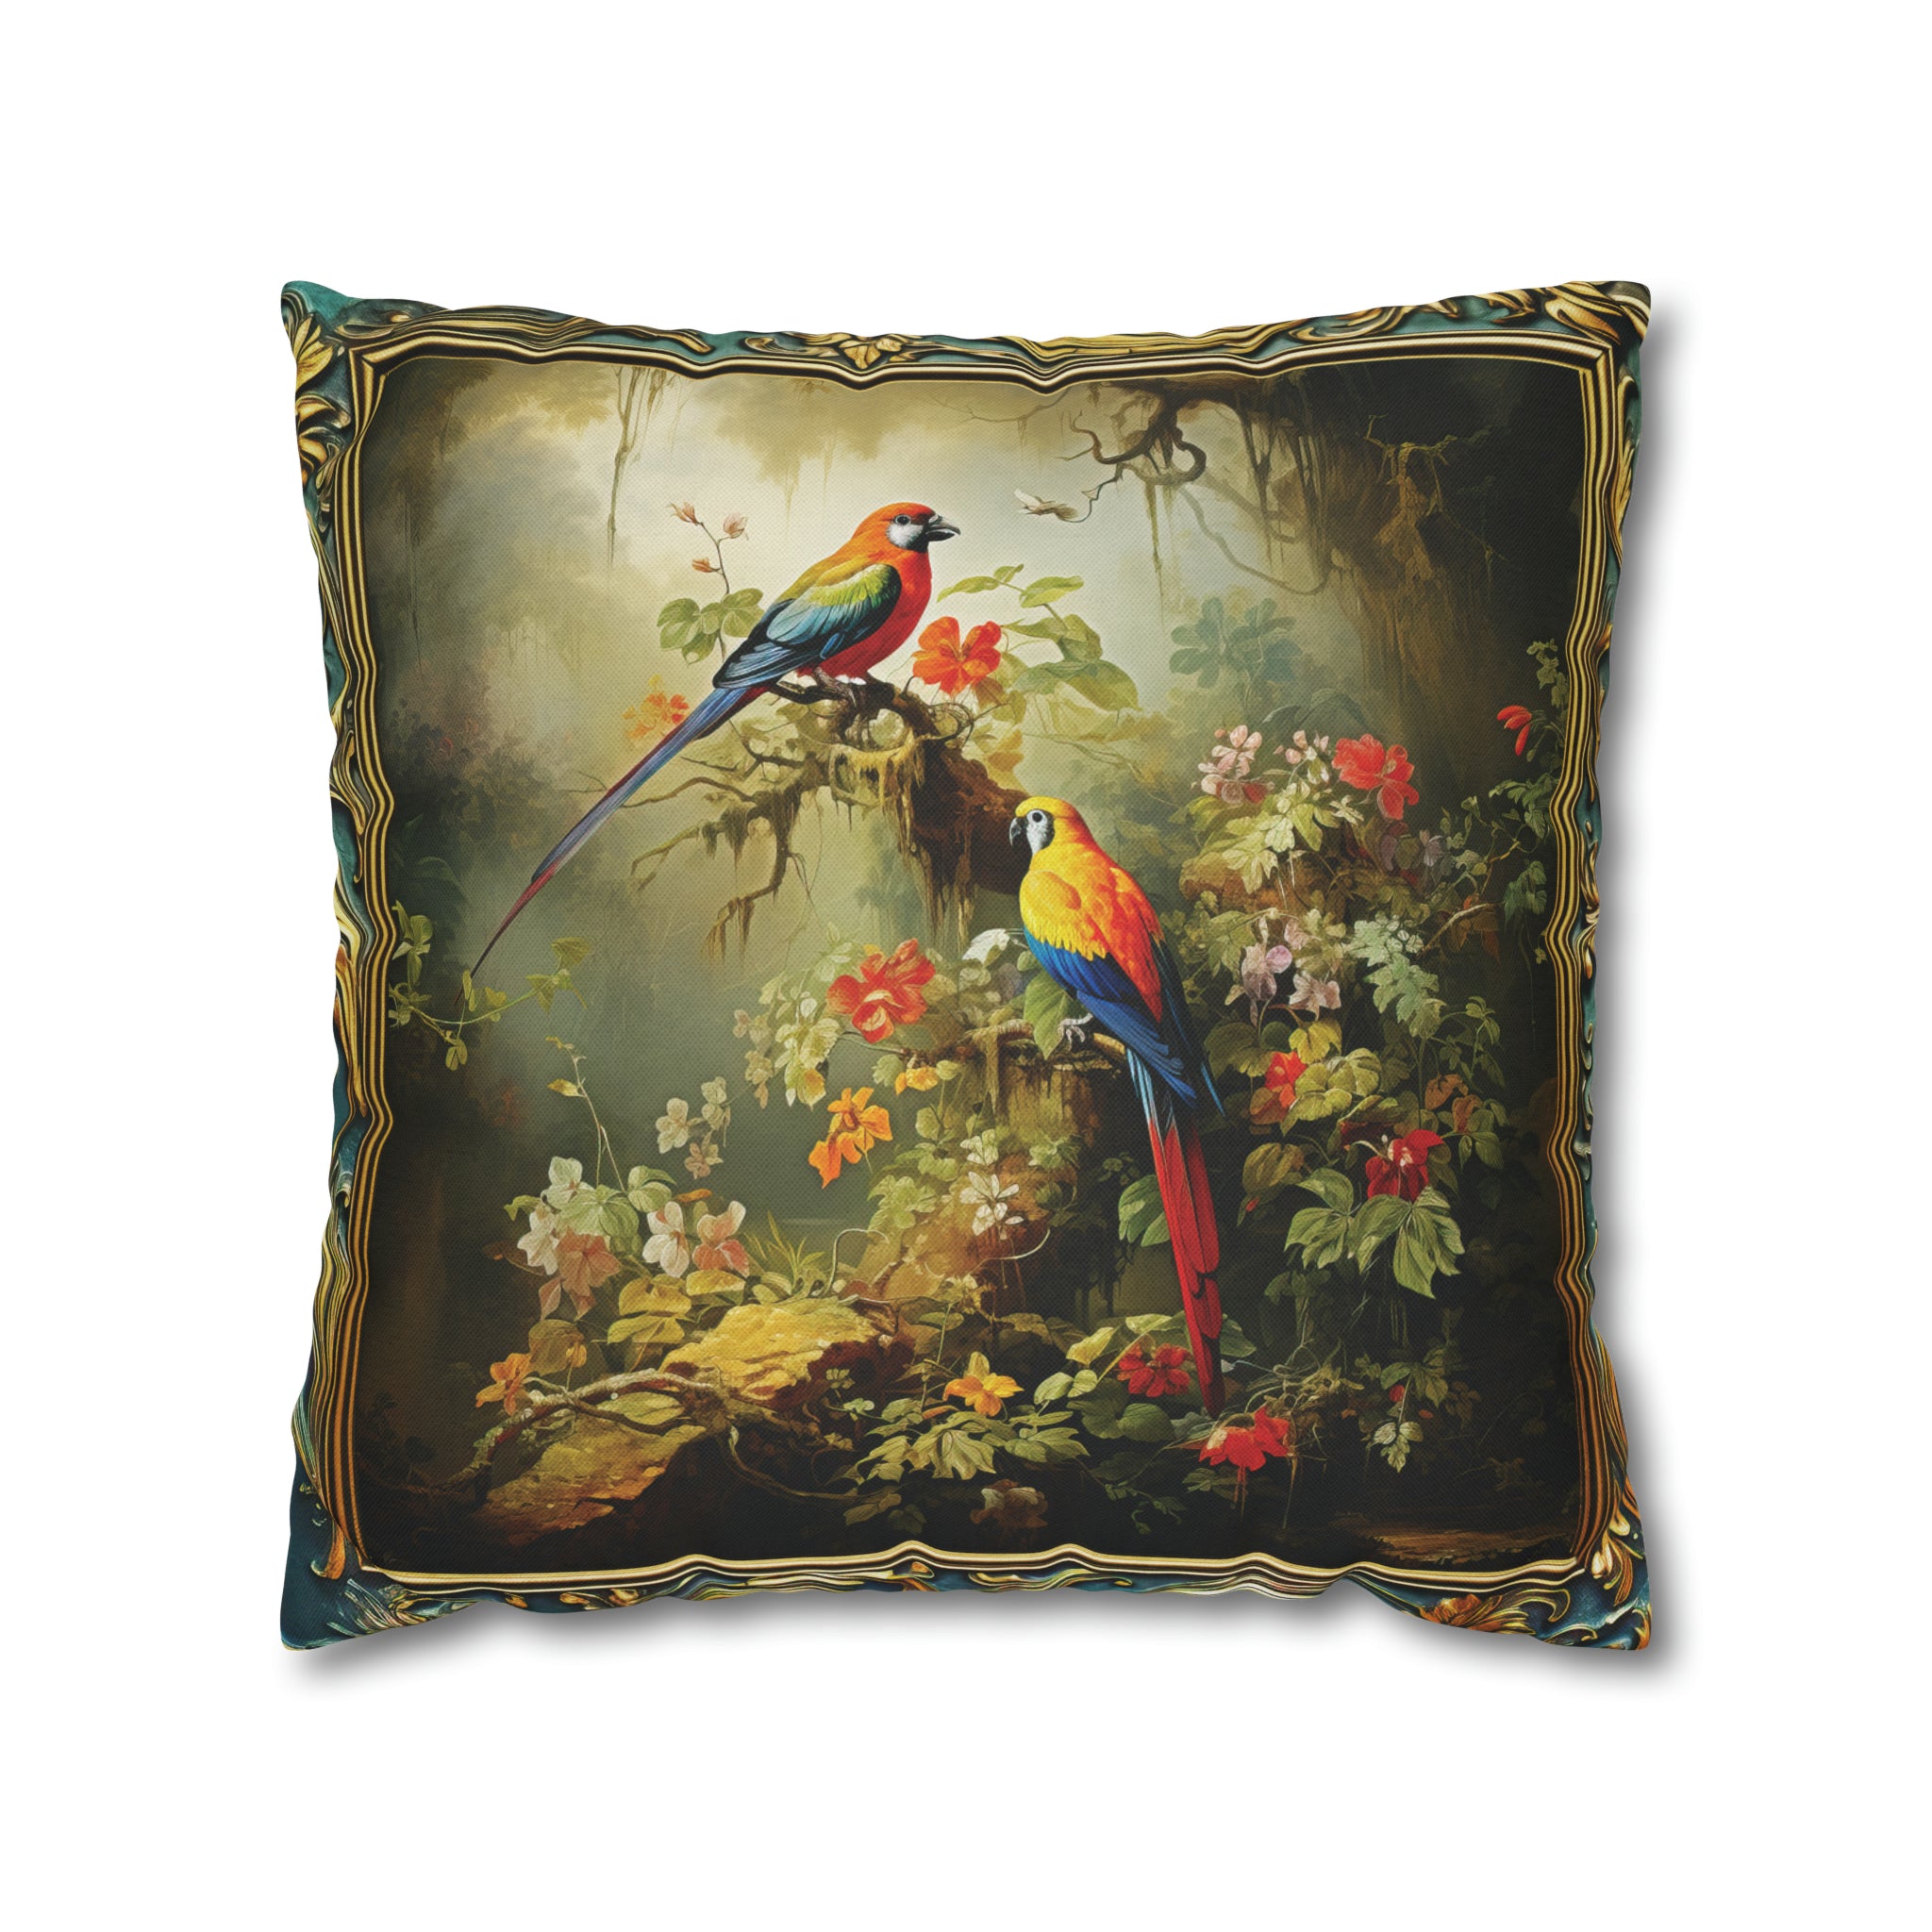 Square Pillow Case 18" x 18", CASE ONLY, no pillow form, original Art ,Two Colorful Tropical Birds on a Flowering Branch in the Forest